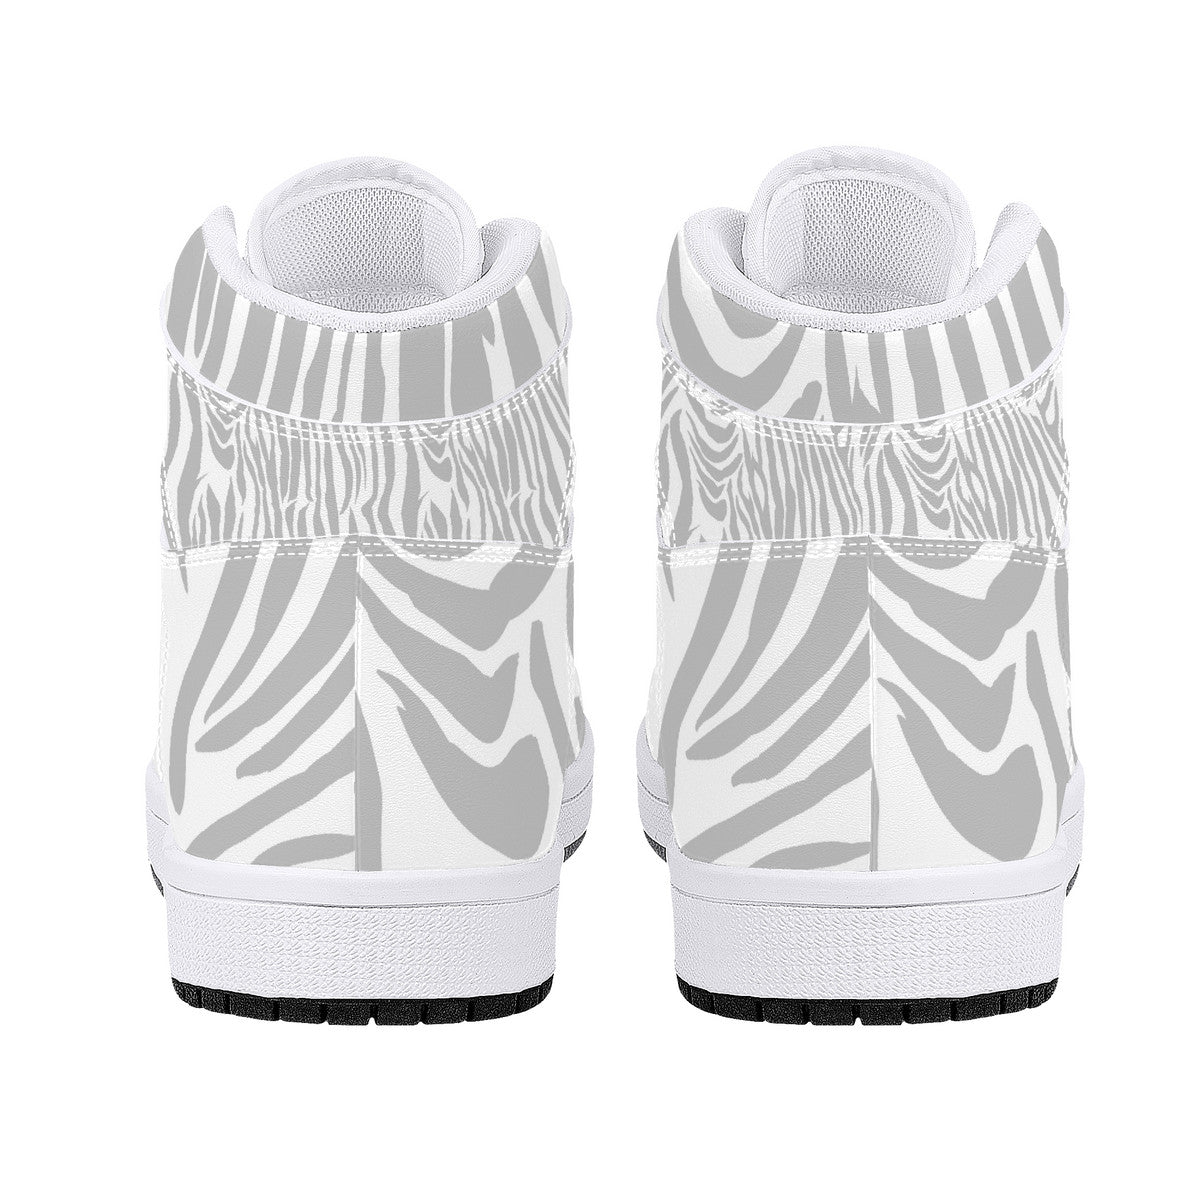 "Nix Zebra" High-Top Synthetic Leather Sneakers